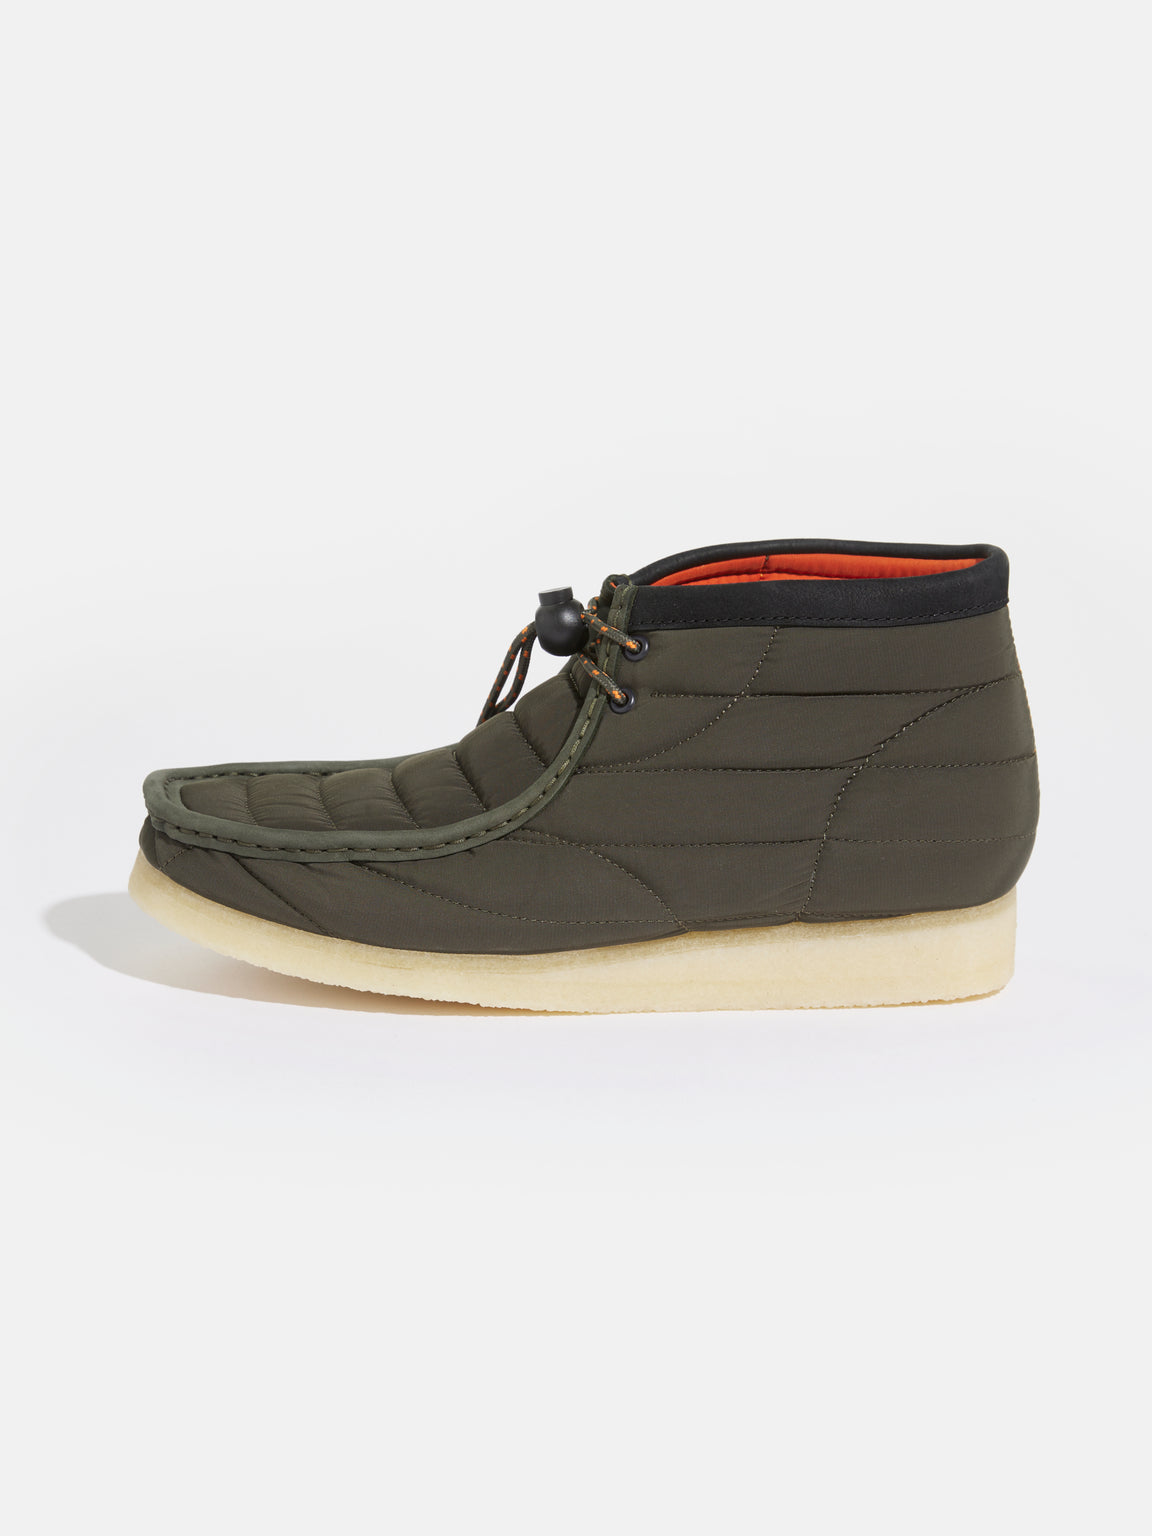 CLARKS | WALLABEE PUFF ANKLE BOOTS FOR MEN KAKI